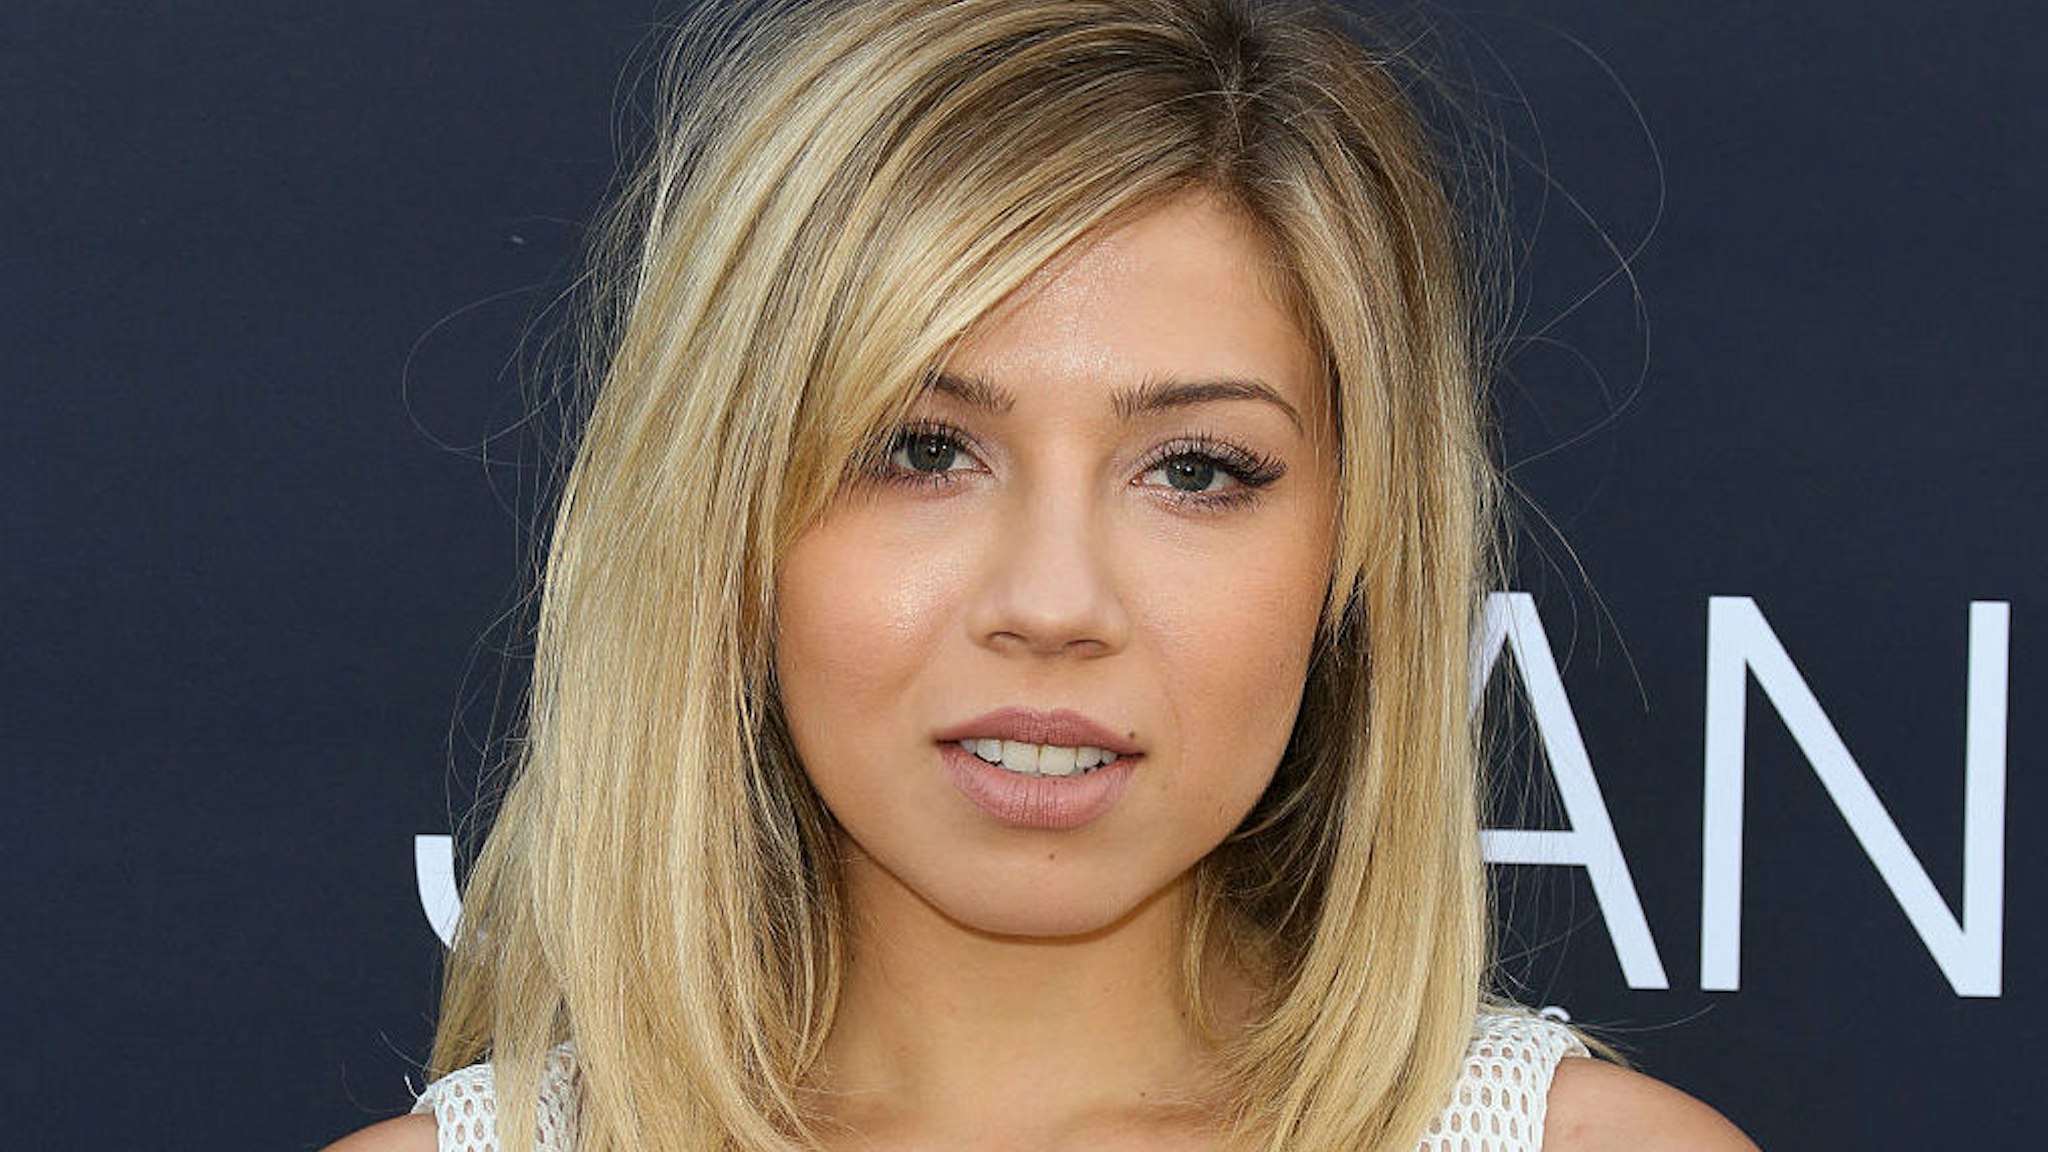 Actress Jennette McCurdy attends the Jovani store opening celebration at Jovani on May 24, 2016 in Los Angeles, California.